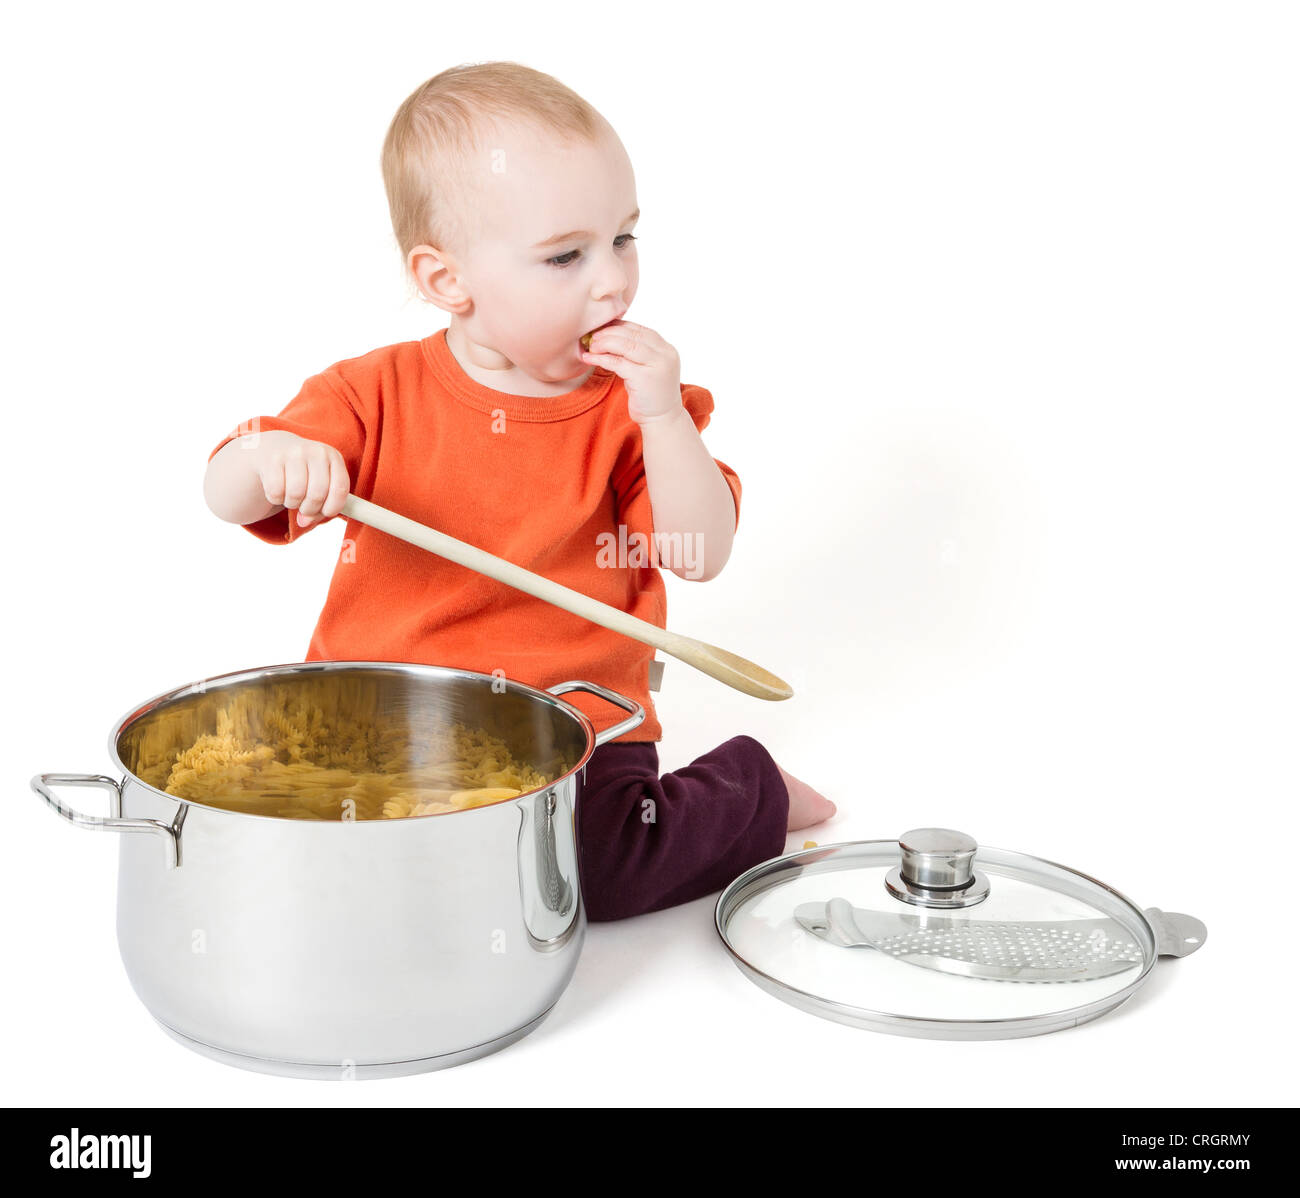 https://c8.alamy.com/comp/CRGRMY/baby-with-big-cooking-pot-isolated-on-white-background-CRGRMY.jpg